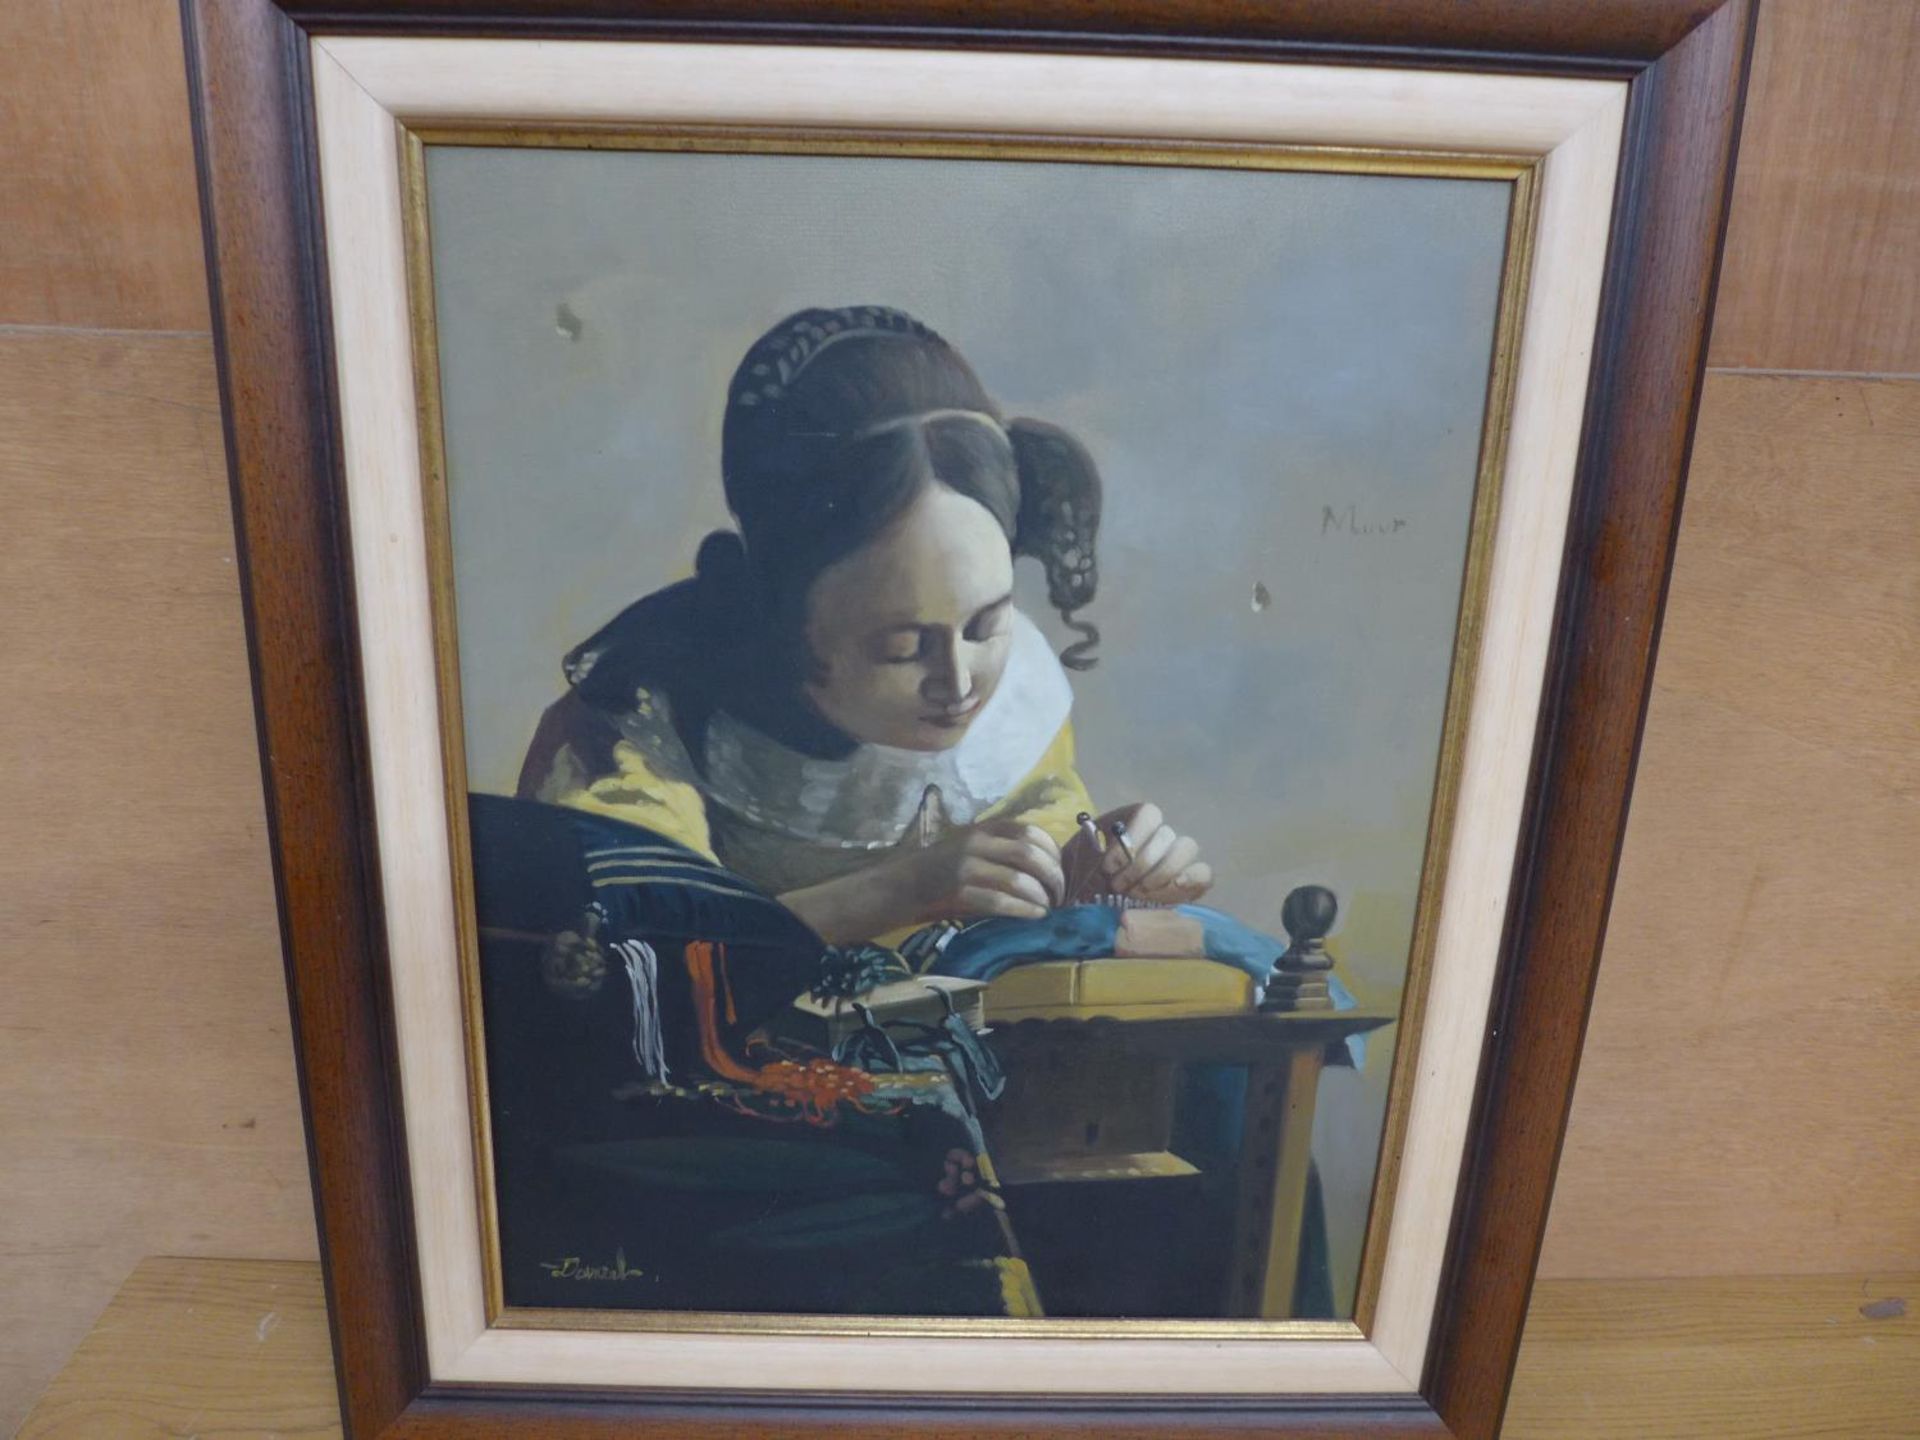 DANIEL (LATE 20TH/EARLY 21ST CENTURY) WOMAN DOING NEEDLEWORK, IN THE MANNER OF VEMEER, OIL ON